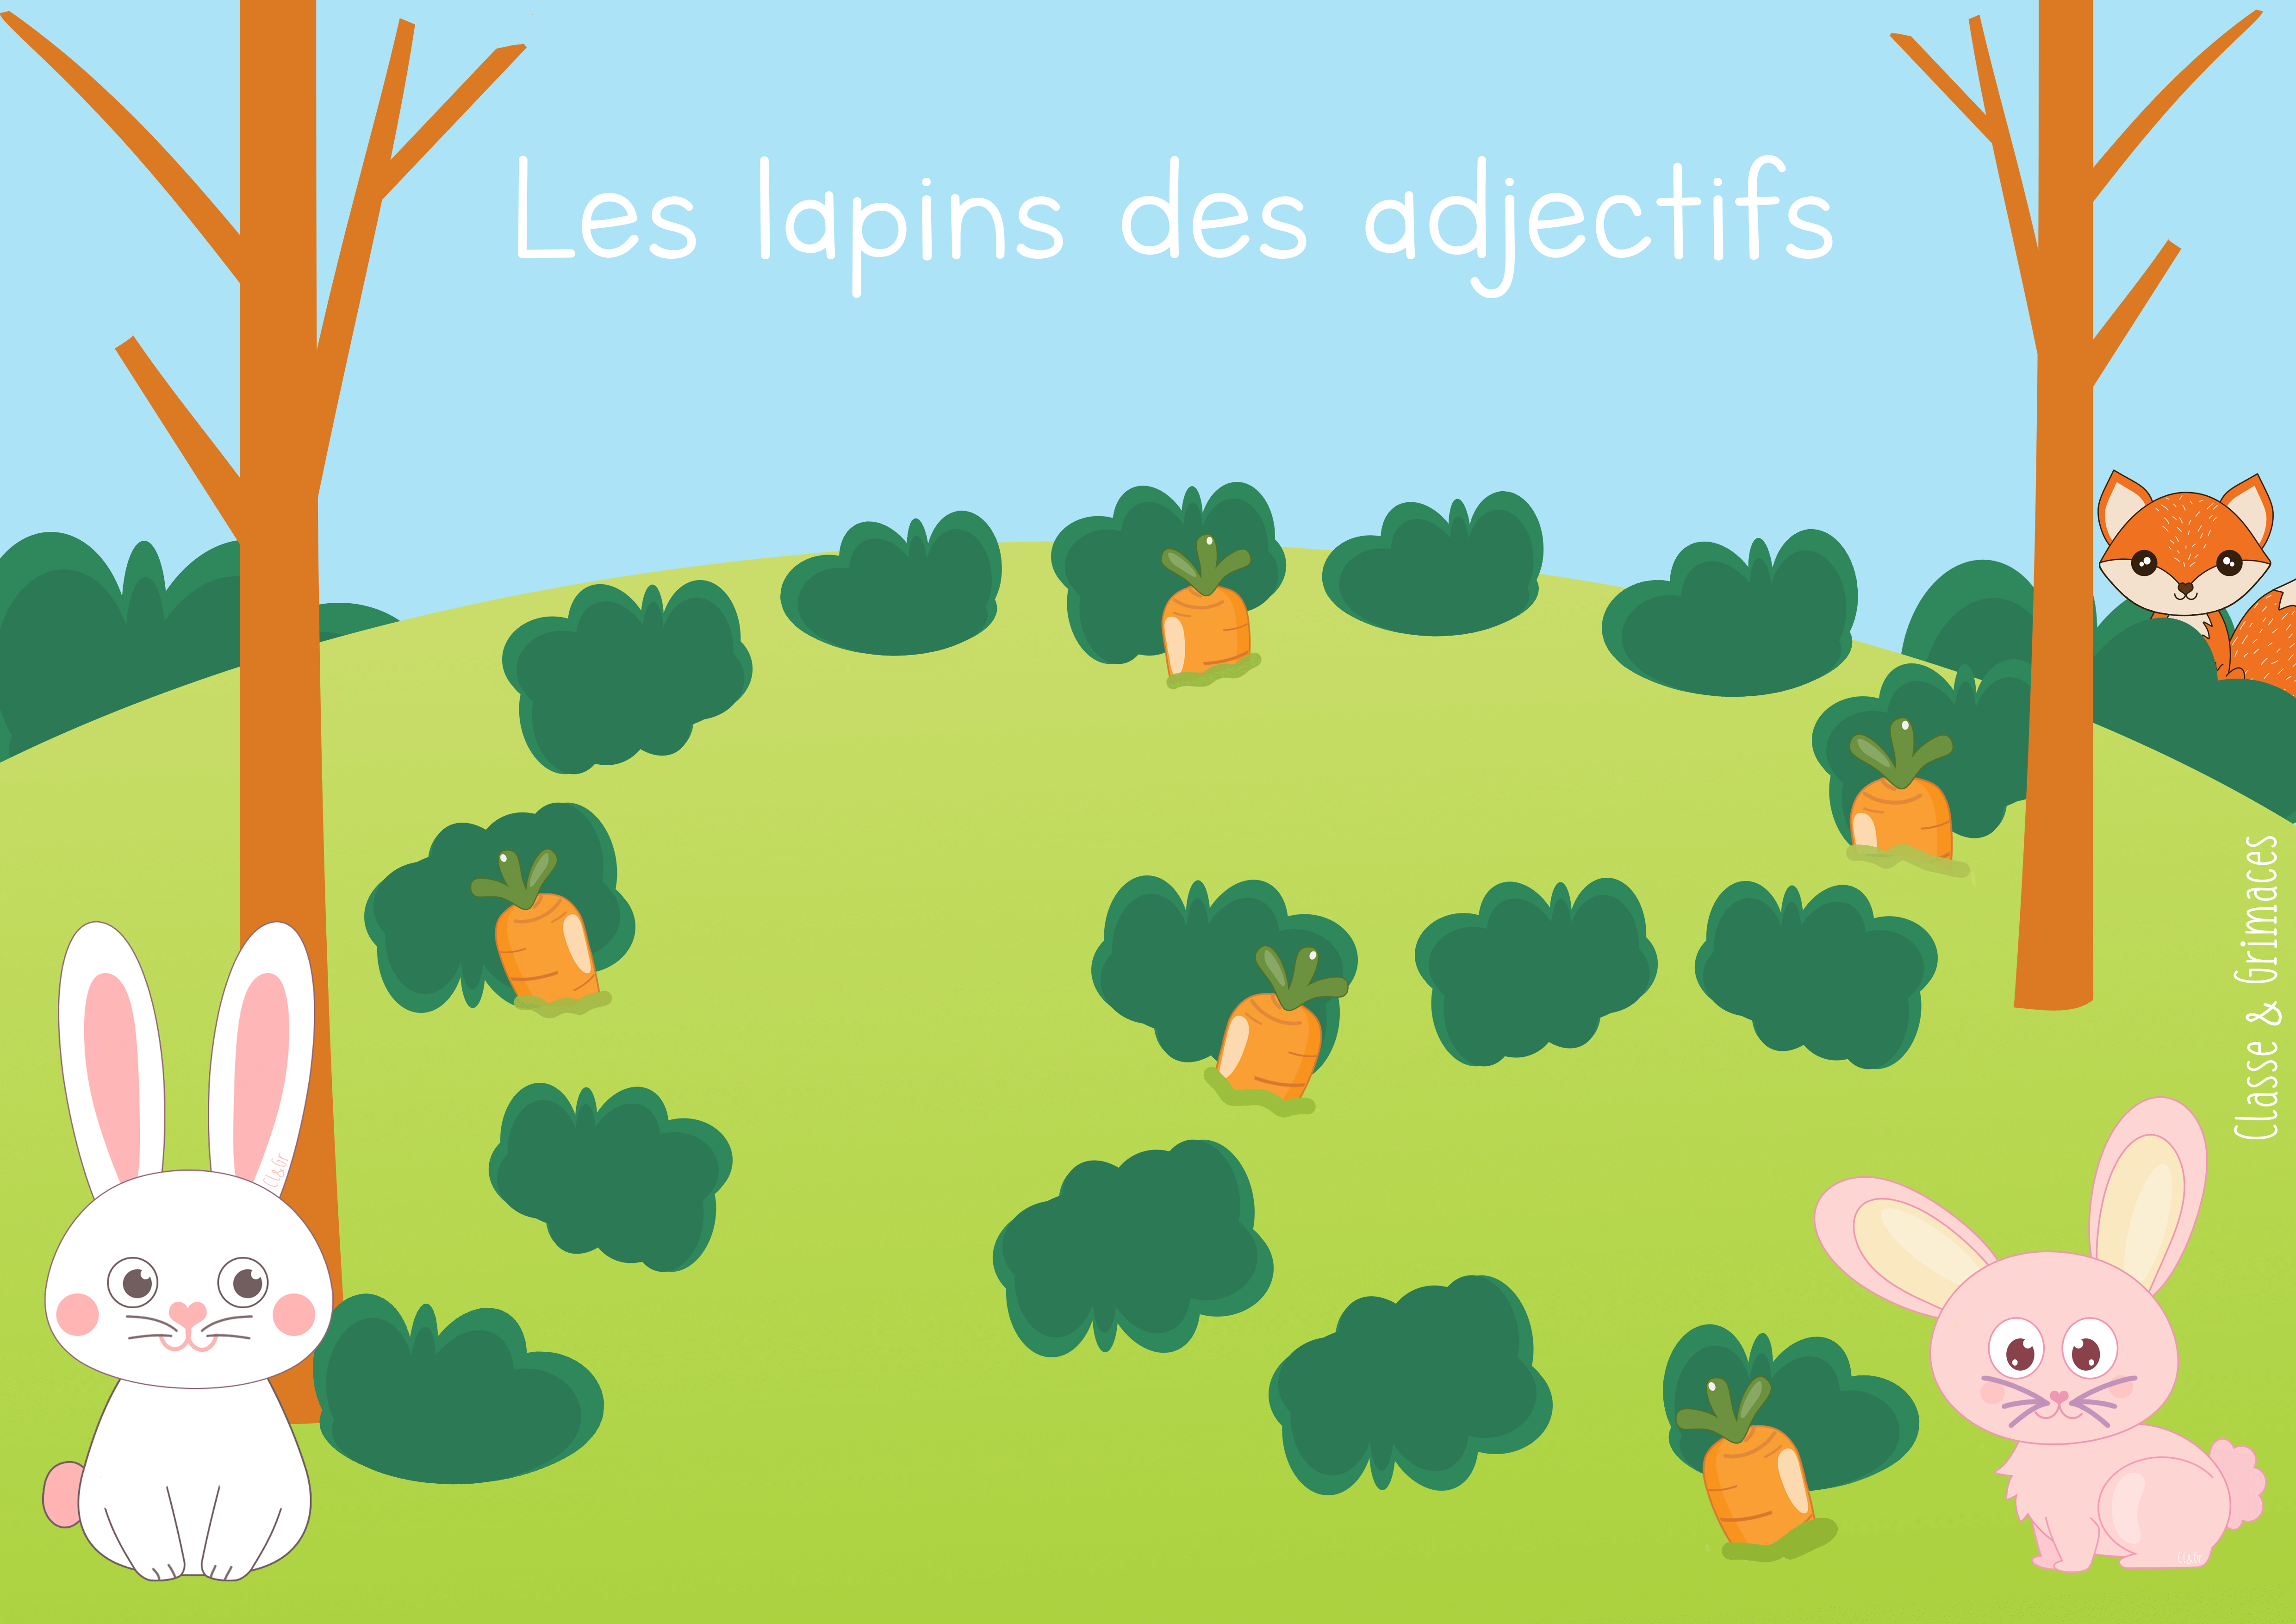 You are currently viewing Atelier pluriel – Les lapins des adjectifs